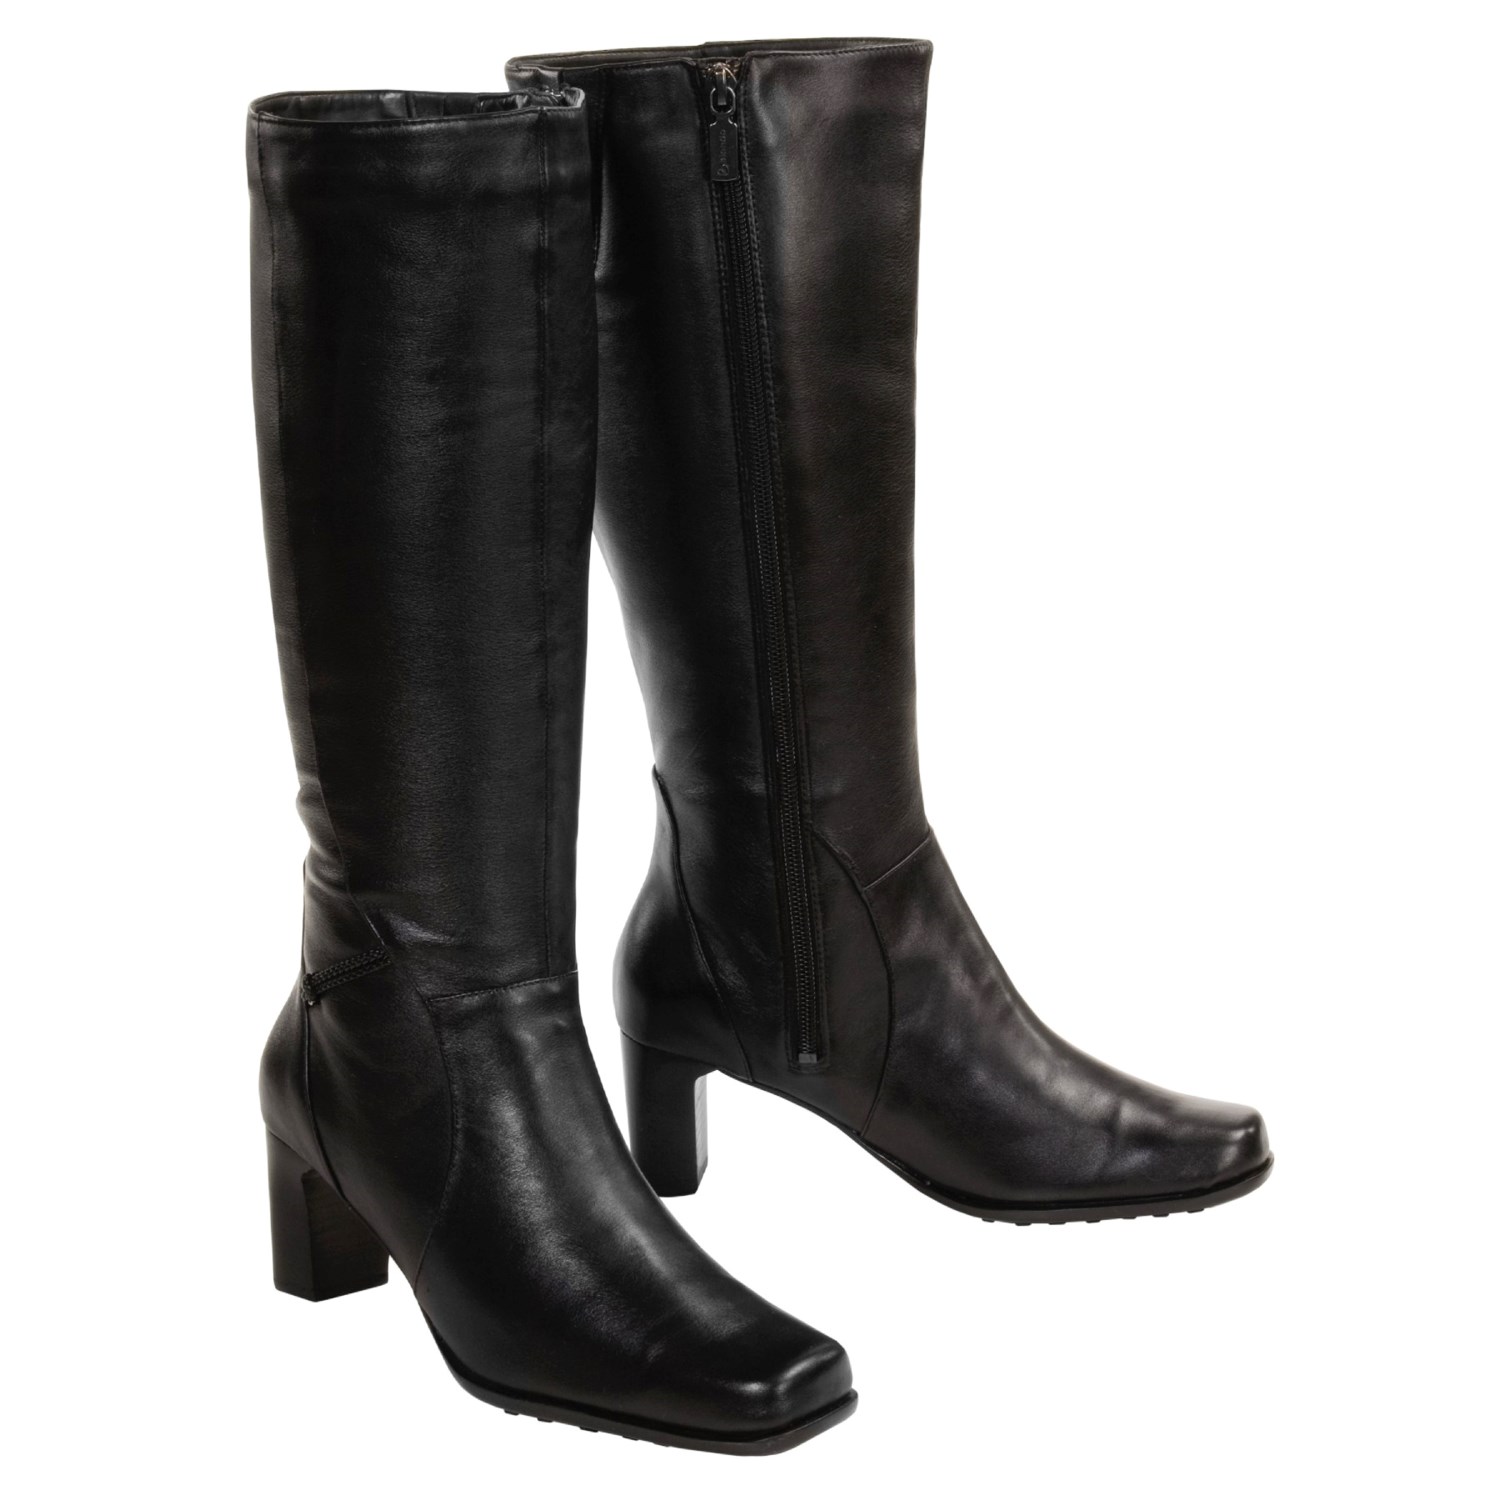 Blondo Kheira Tall Boots (For Women) 1769C - Save 45%